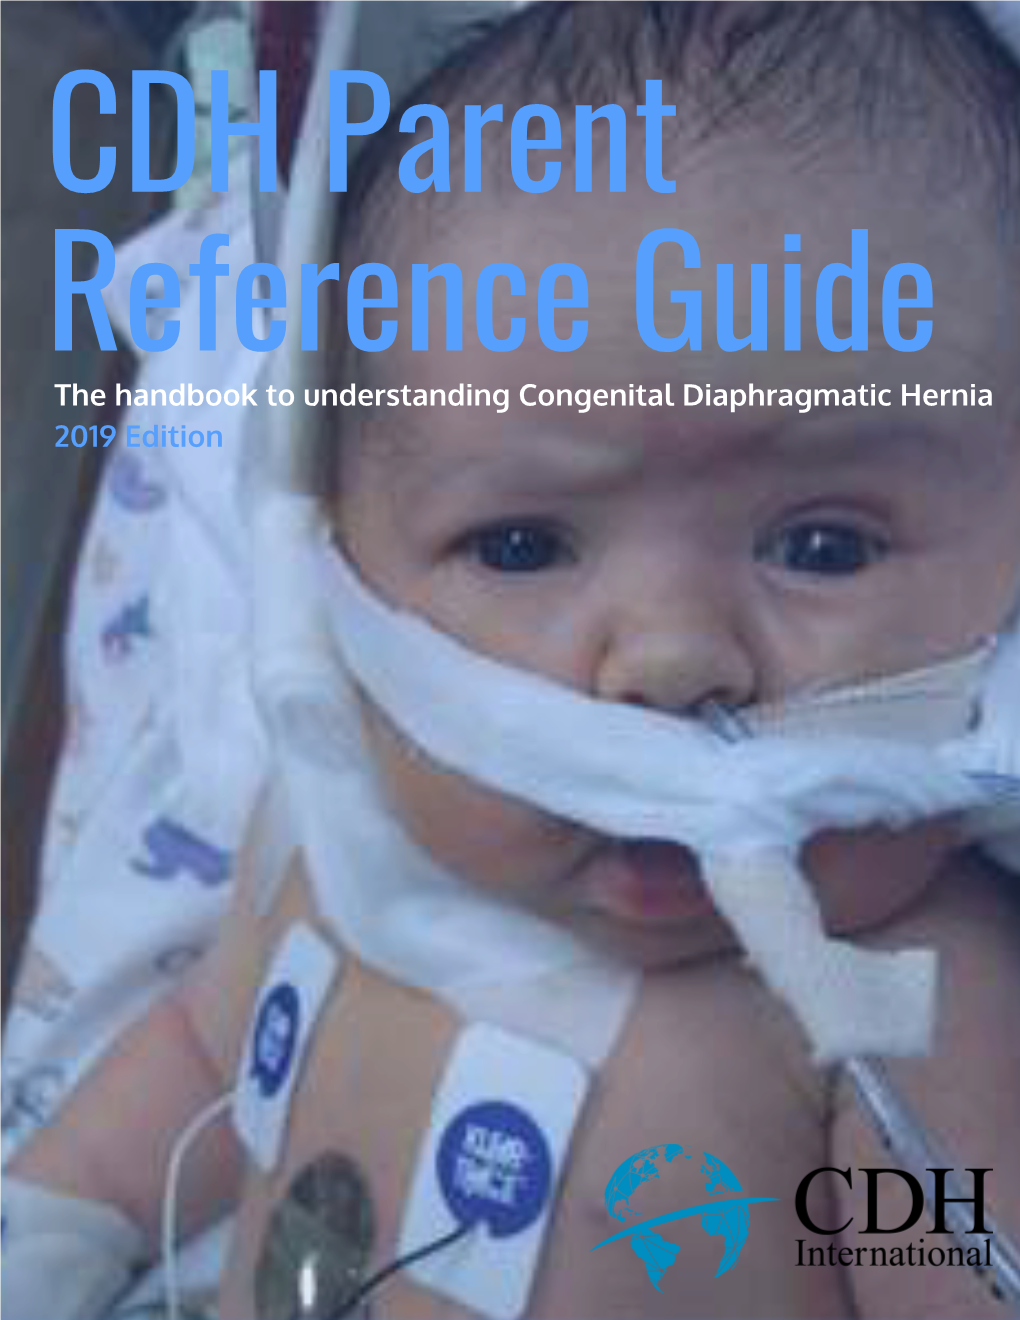 CDH Parent Reference Guide the Handbook to Understanding Congenital Diaphragmatic Hernia 2019 Edition